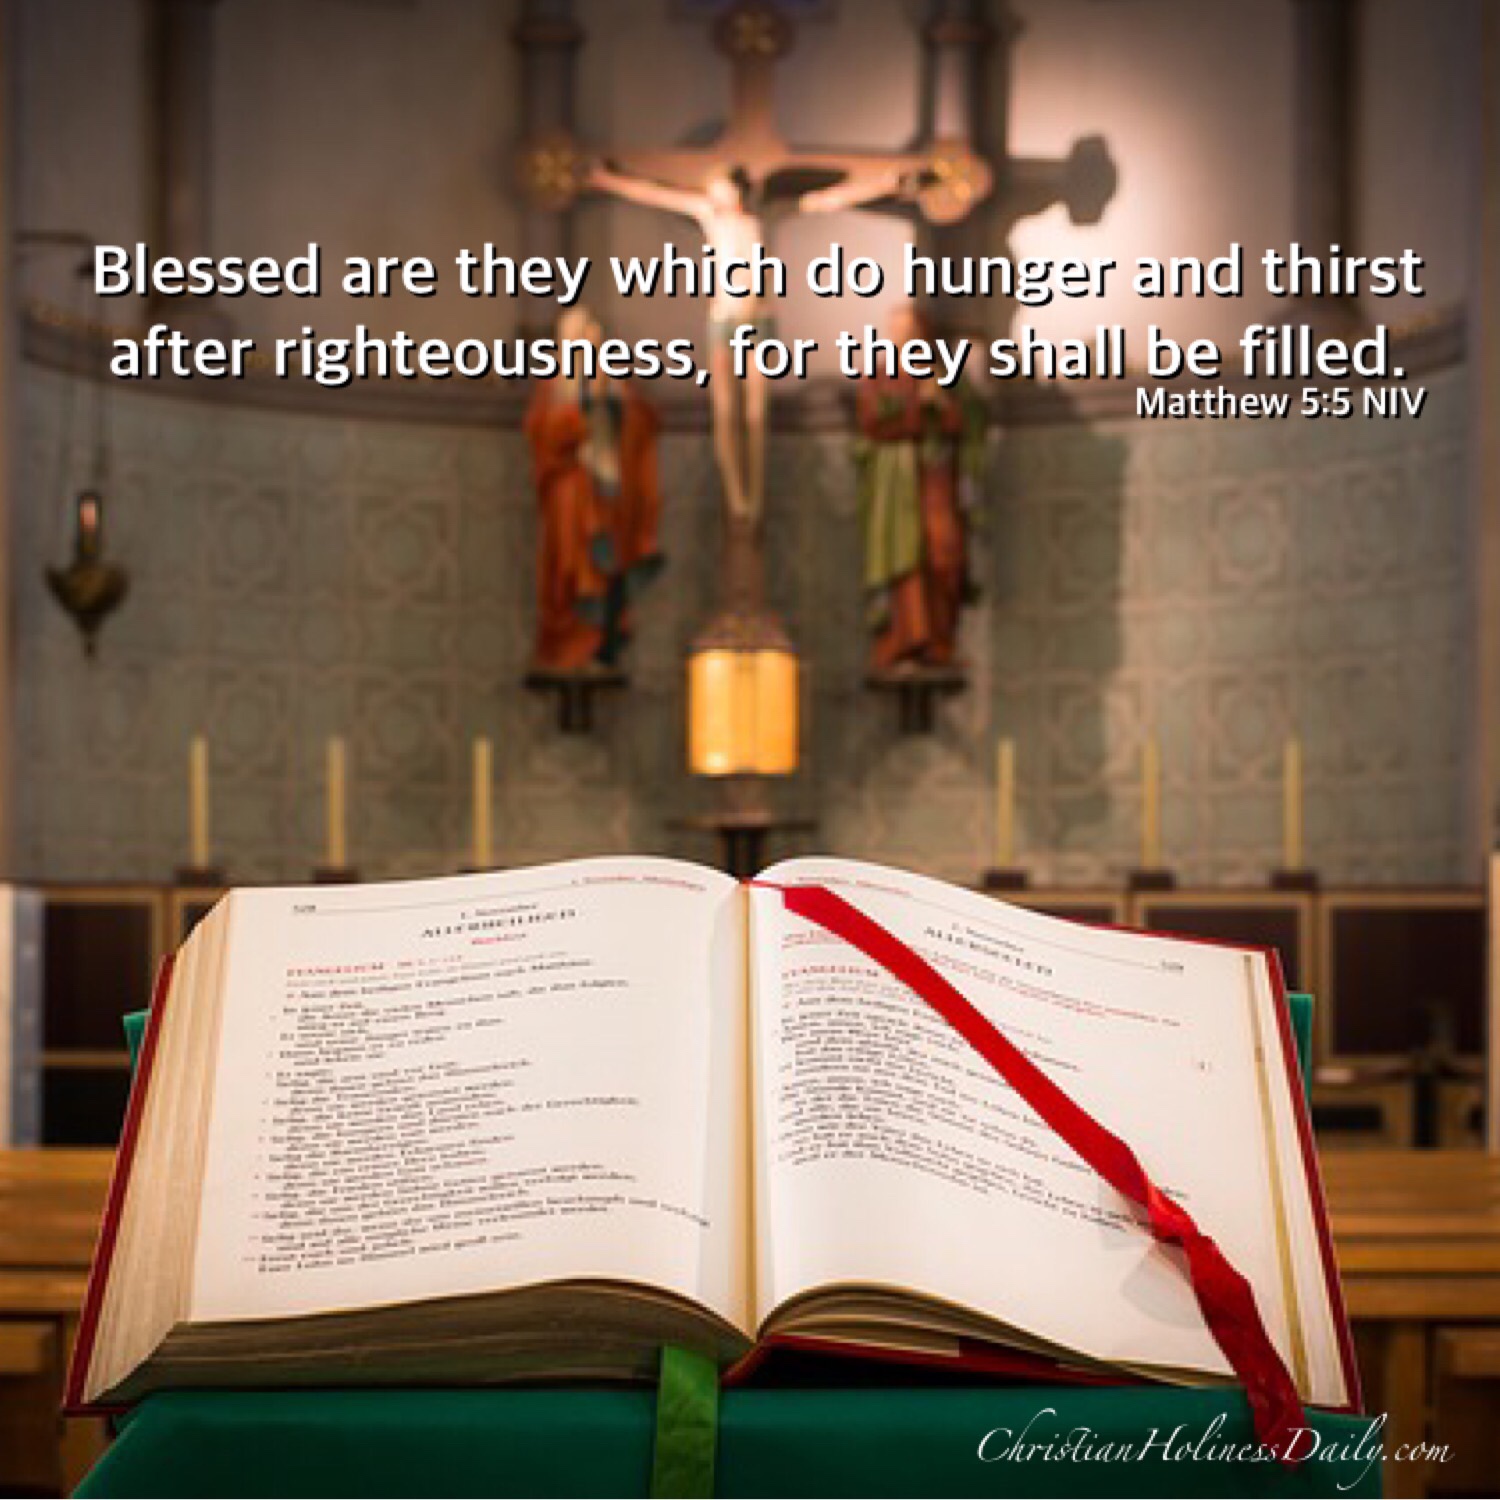 Blessed are they which do hunger and thirst after righteousness, for they shall be filled.